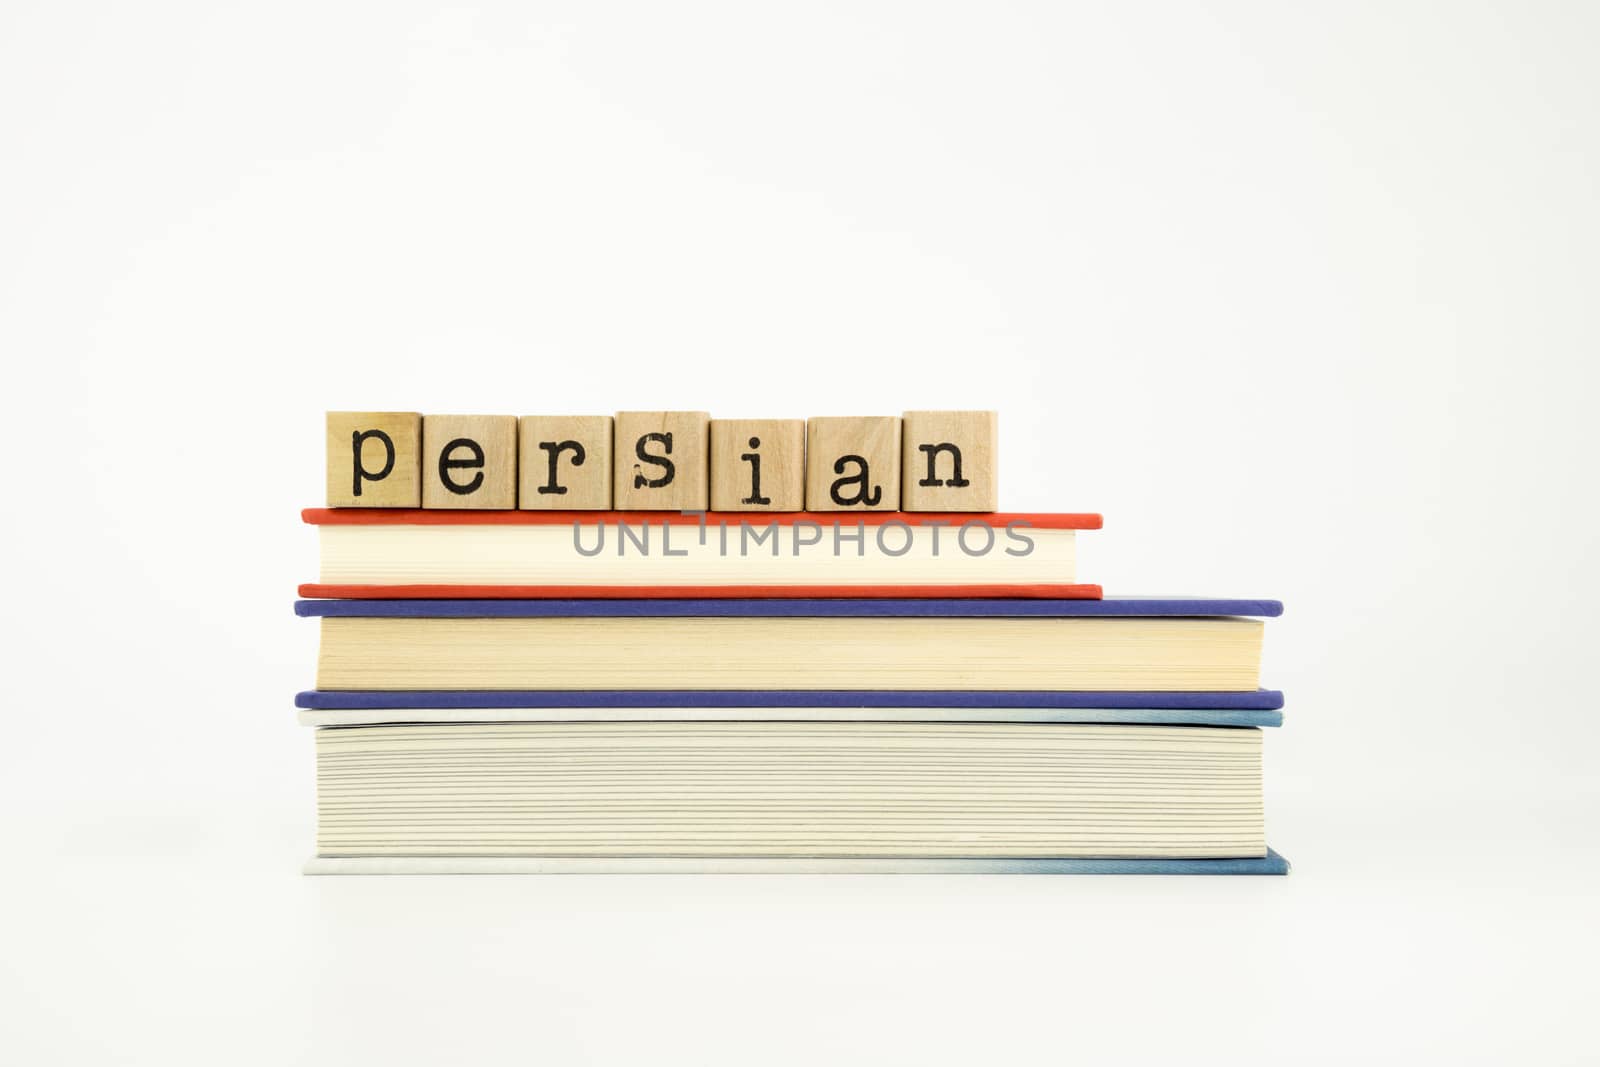 persian word on wood stamps stack on books, foreign language and translation concept